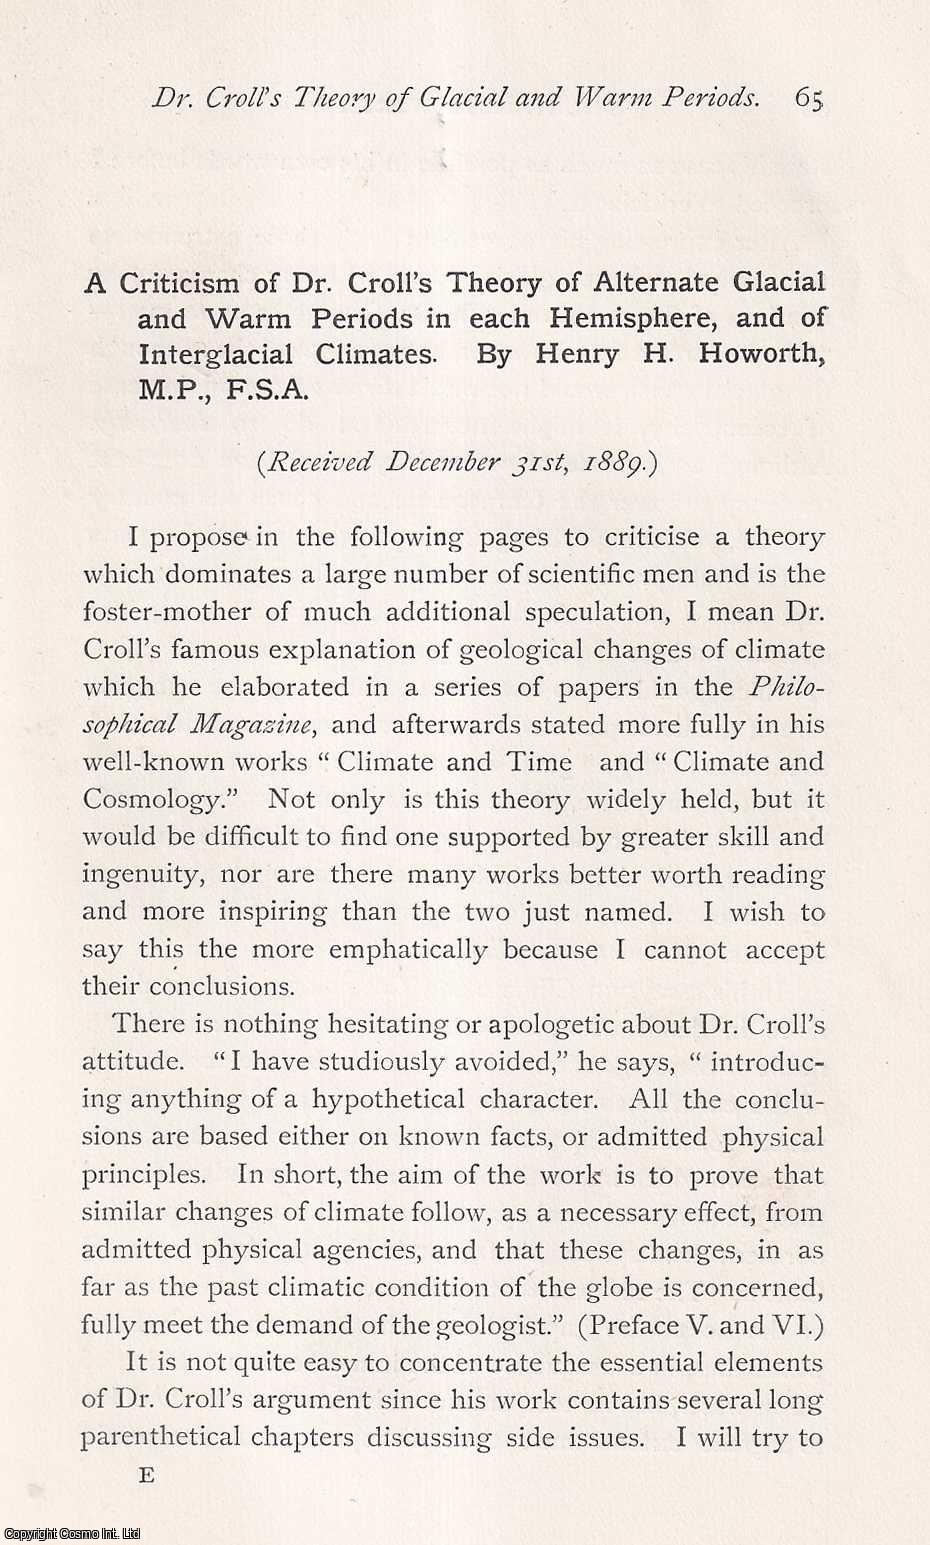 Henry H. Howorth - A Criticism of Dr. Croll's Theory of Alternate Glacial and Warm Periods in each Hemisphere, and of Interglacial Climates. This is an original article from the Memoirs of the Literary and Philosophical Society of Manchester, 1890.